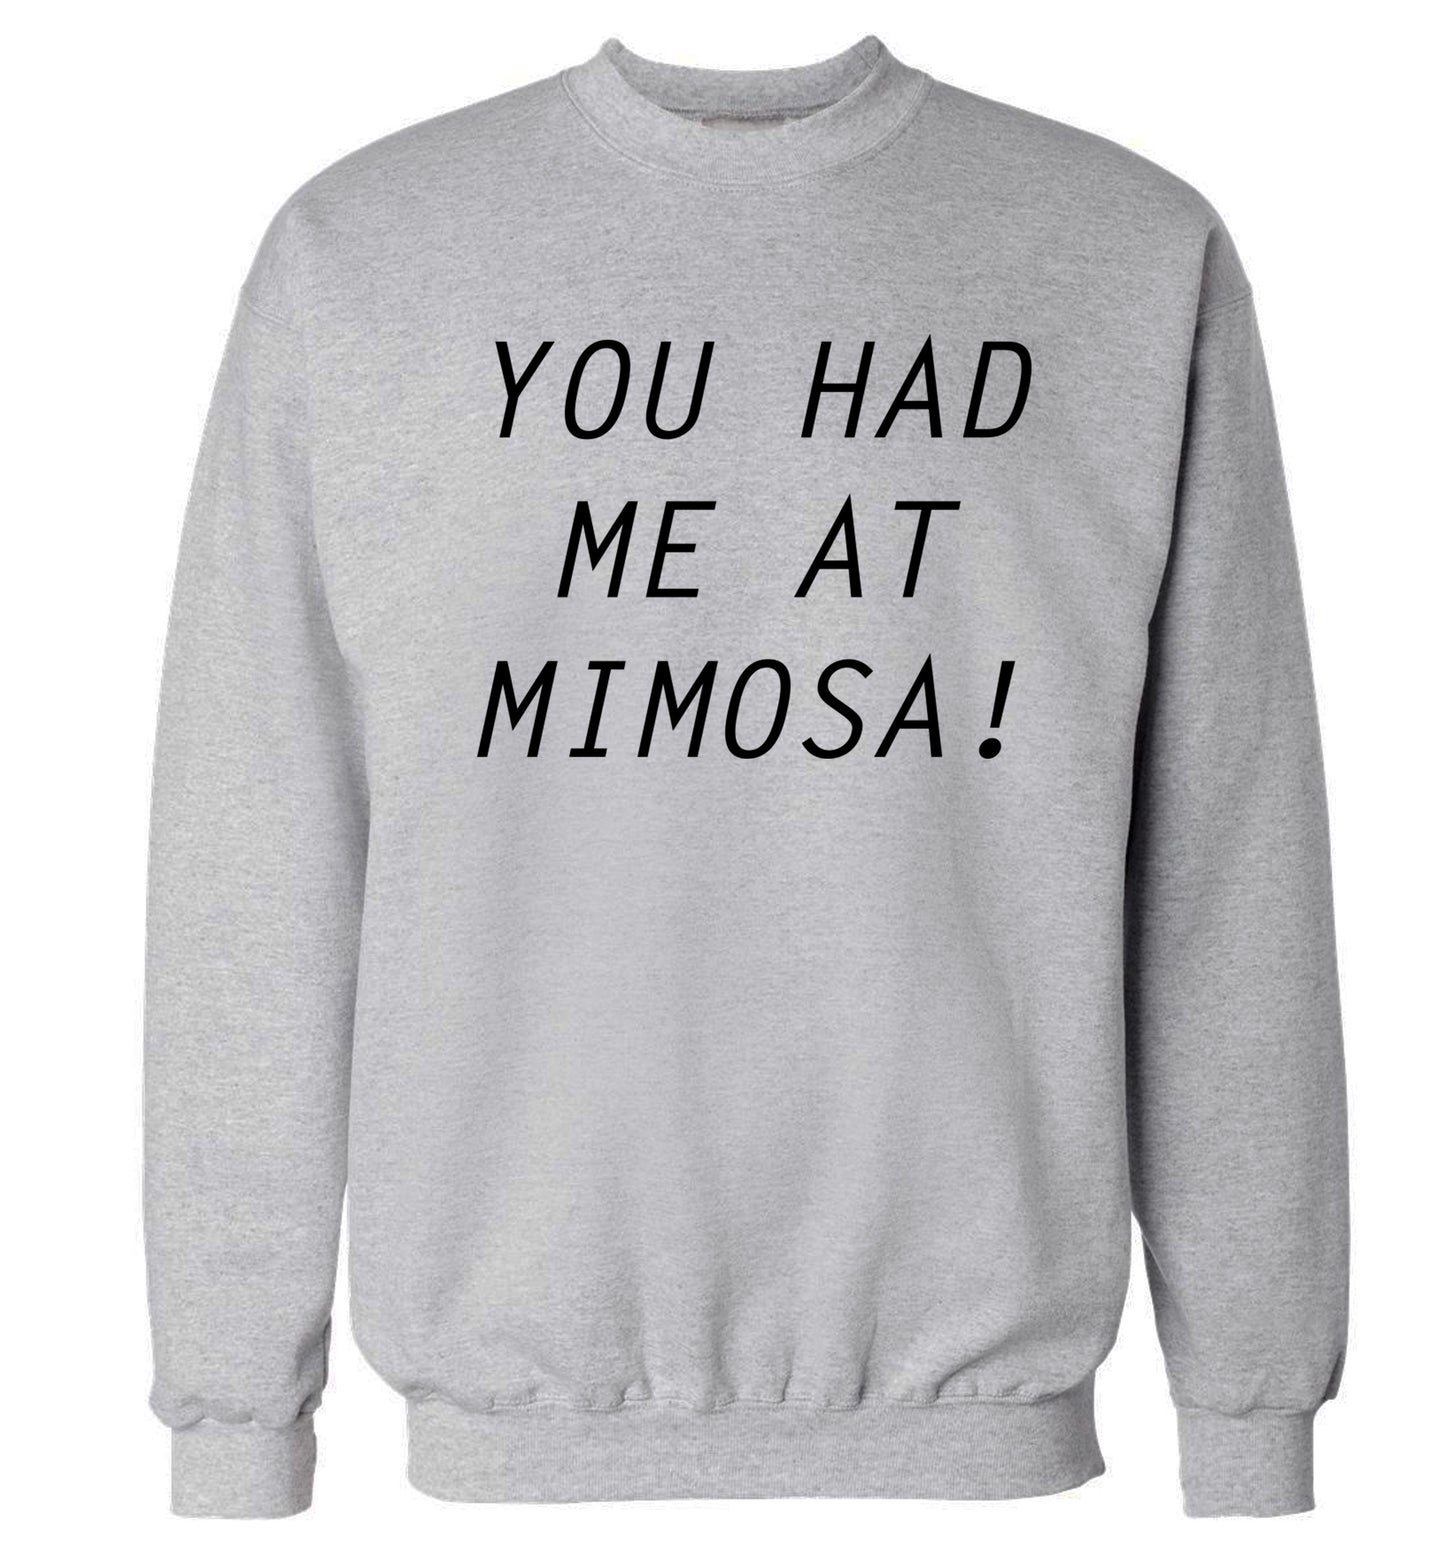 You had me at mimosa Adult's unisex grey Sweater 2XL